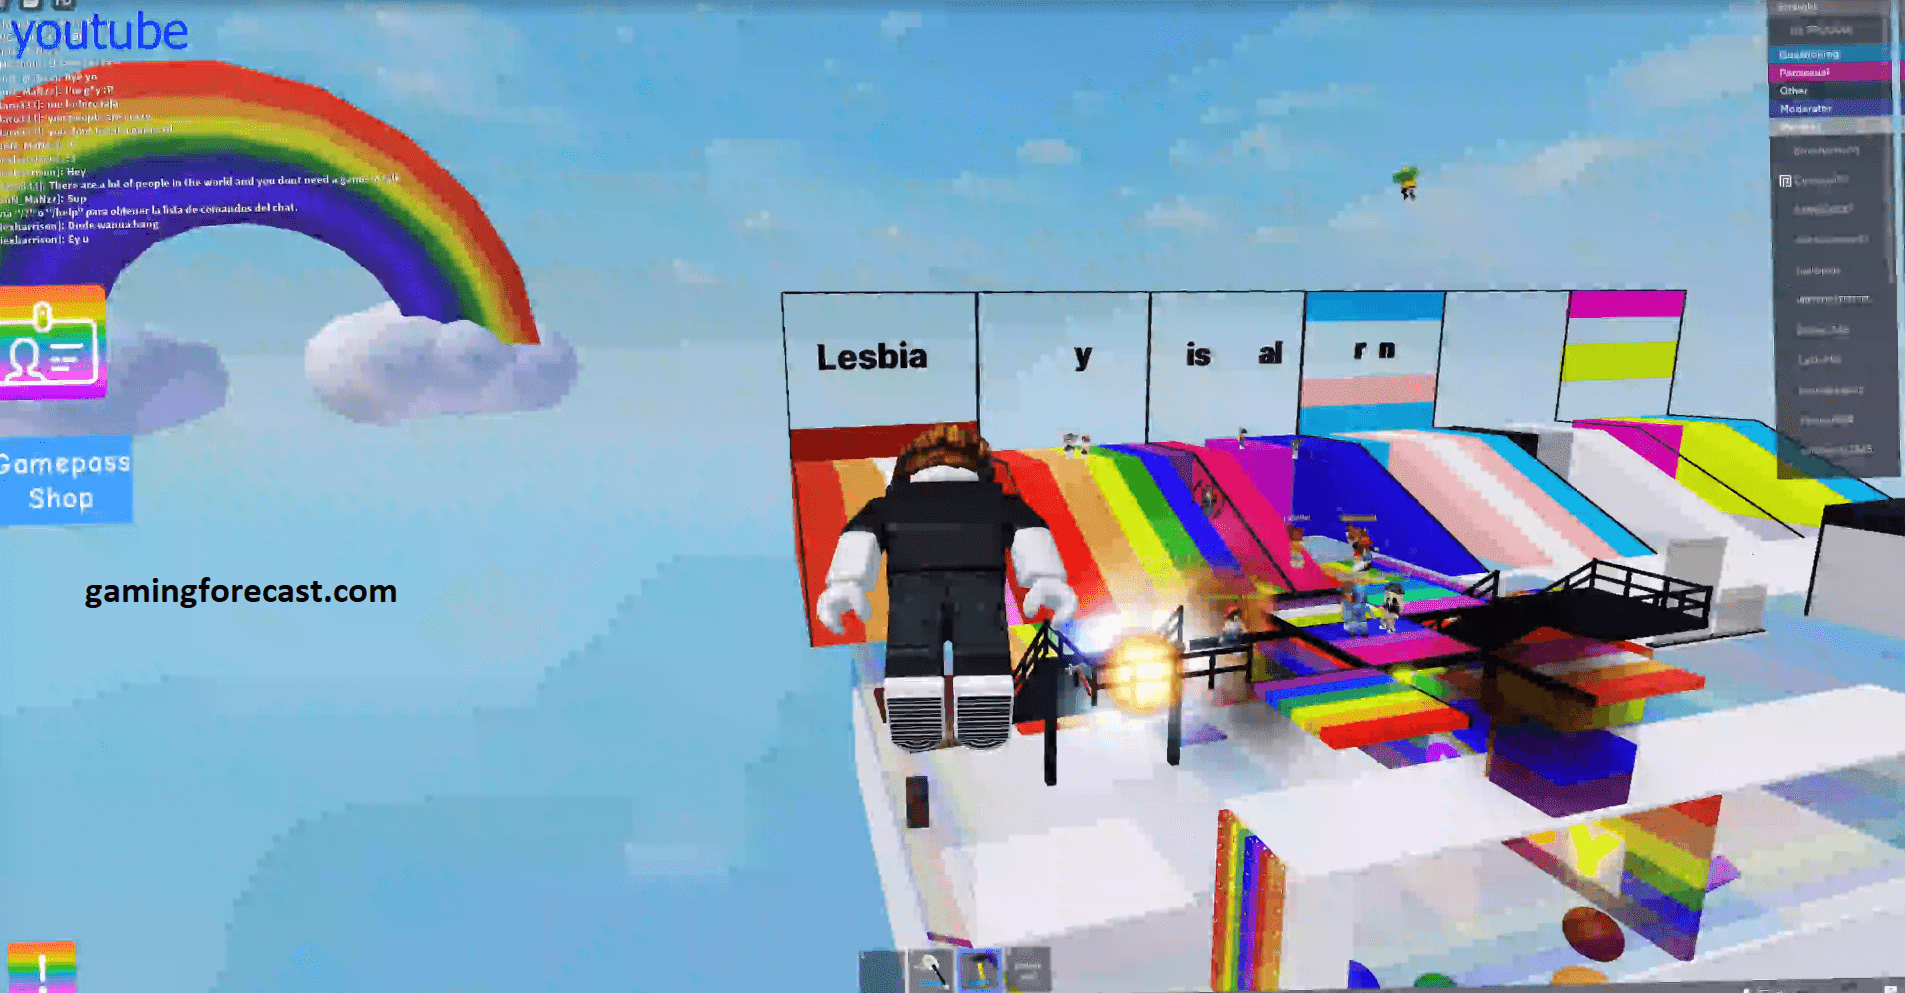 Roblox Hack Download Pc Destroy Lobby Fly Aimbot Scripts 2021 Gaming Forecast Download Free Online Game Hacks - download hack tool for roblox